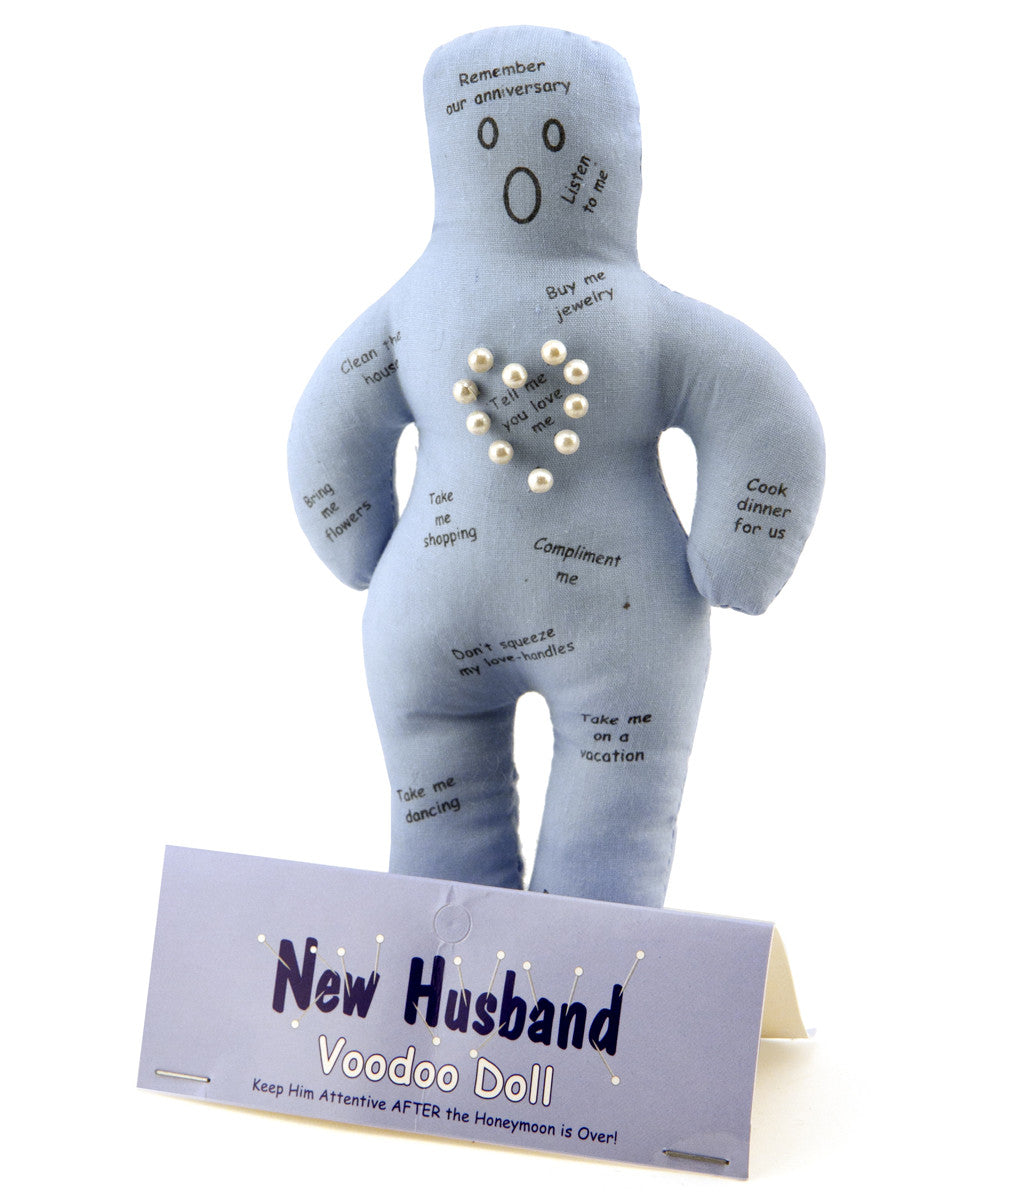 Image of The New Husband VooDoo Doll